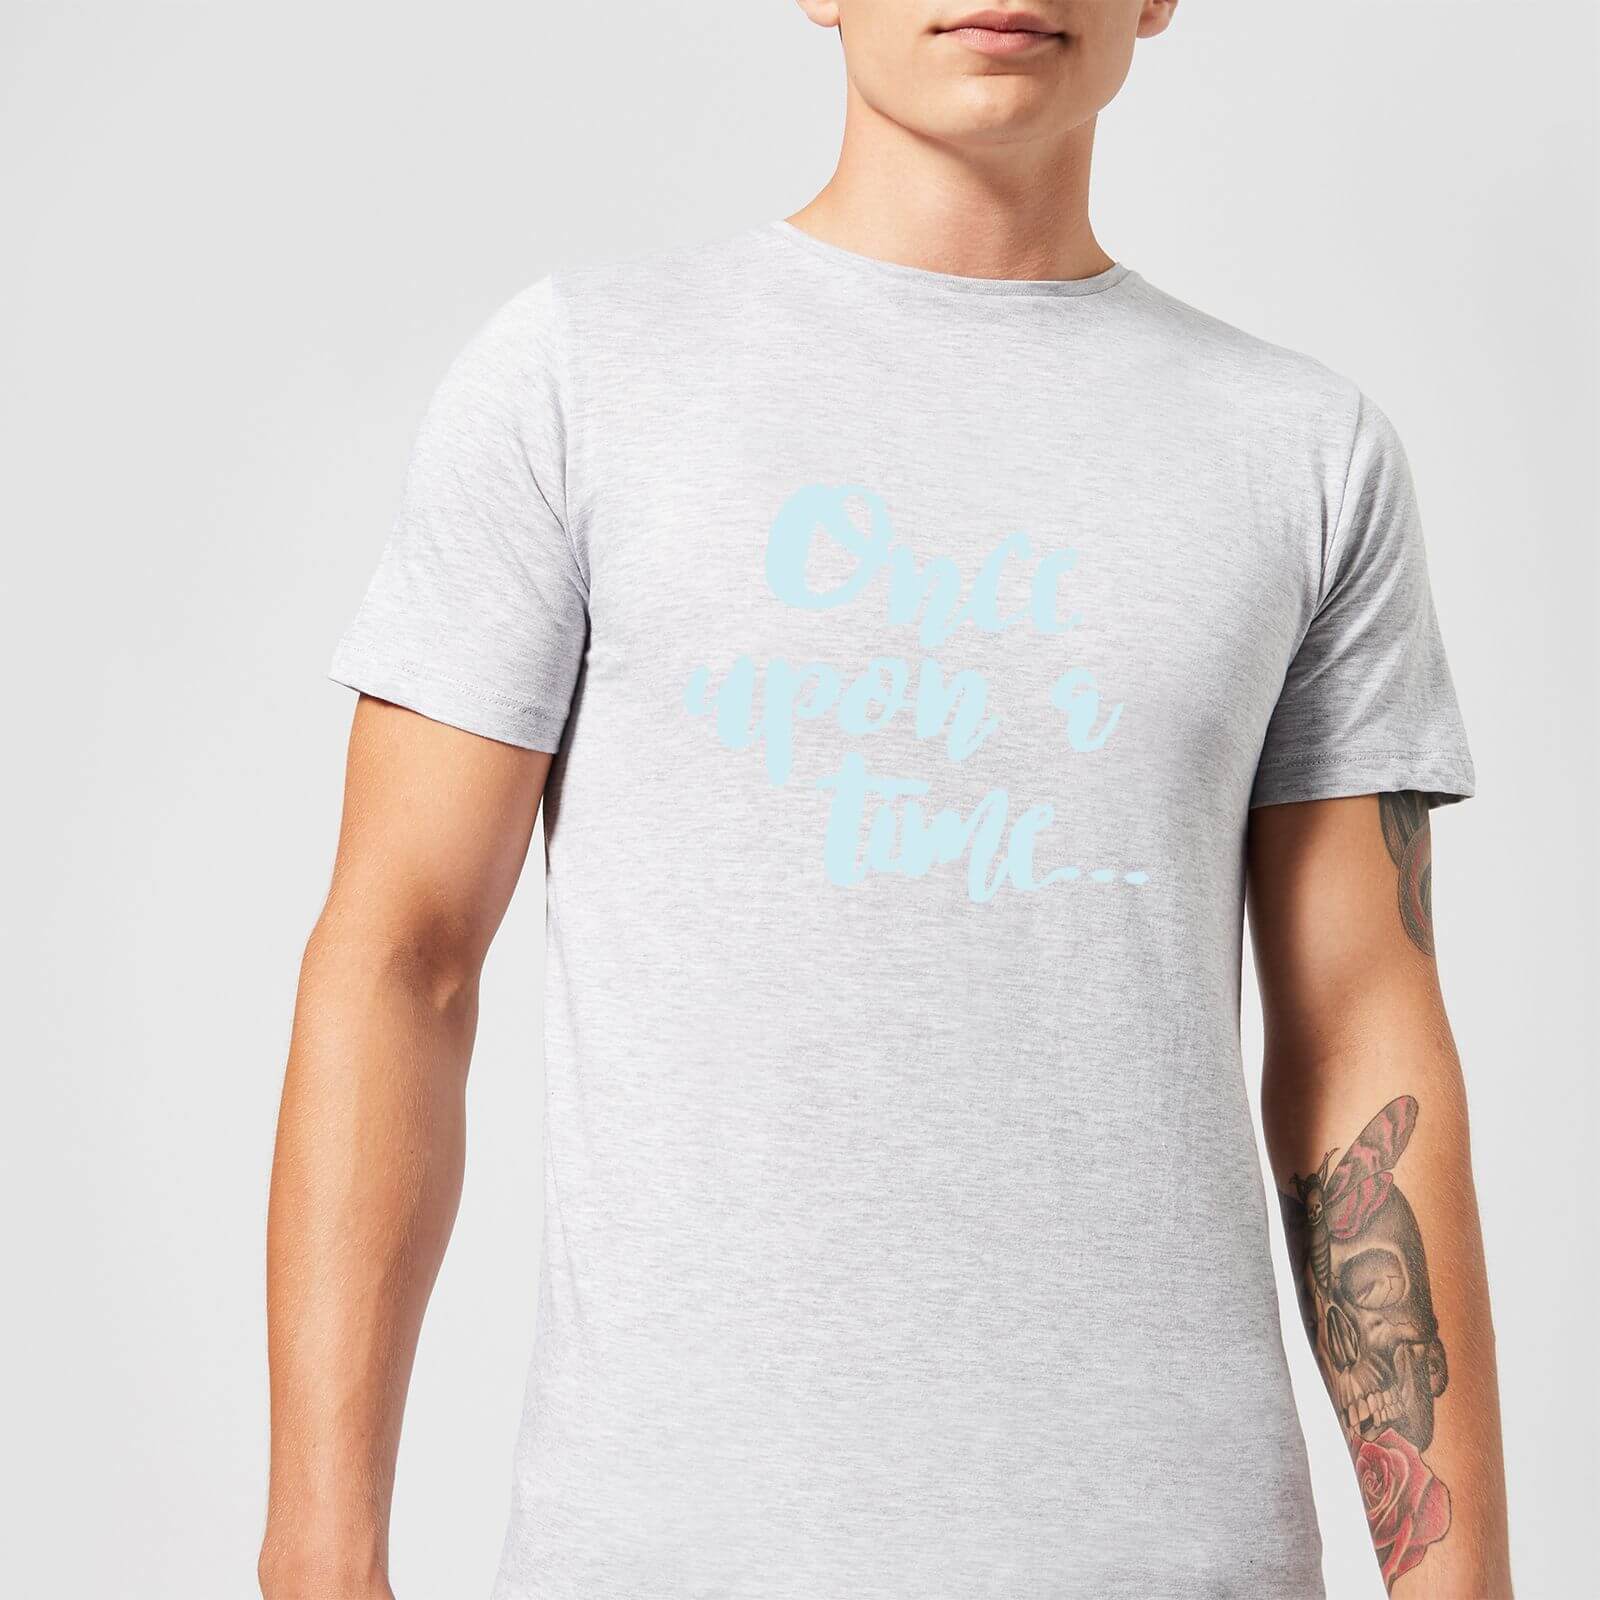 Once Upon A Time Men's T-Shirt - Grey - S - Grey